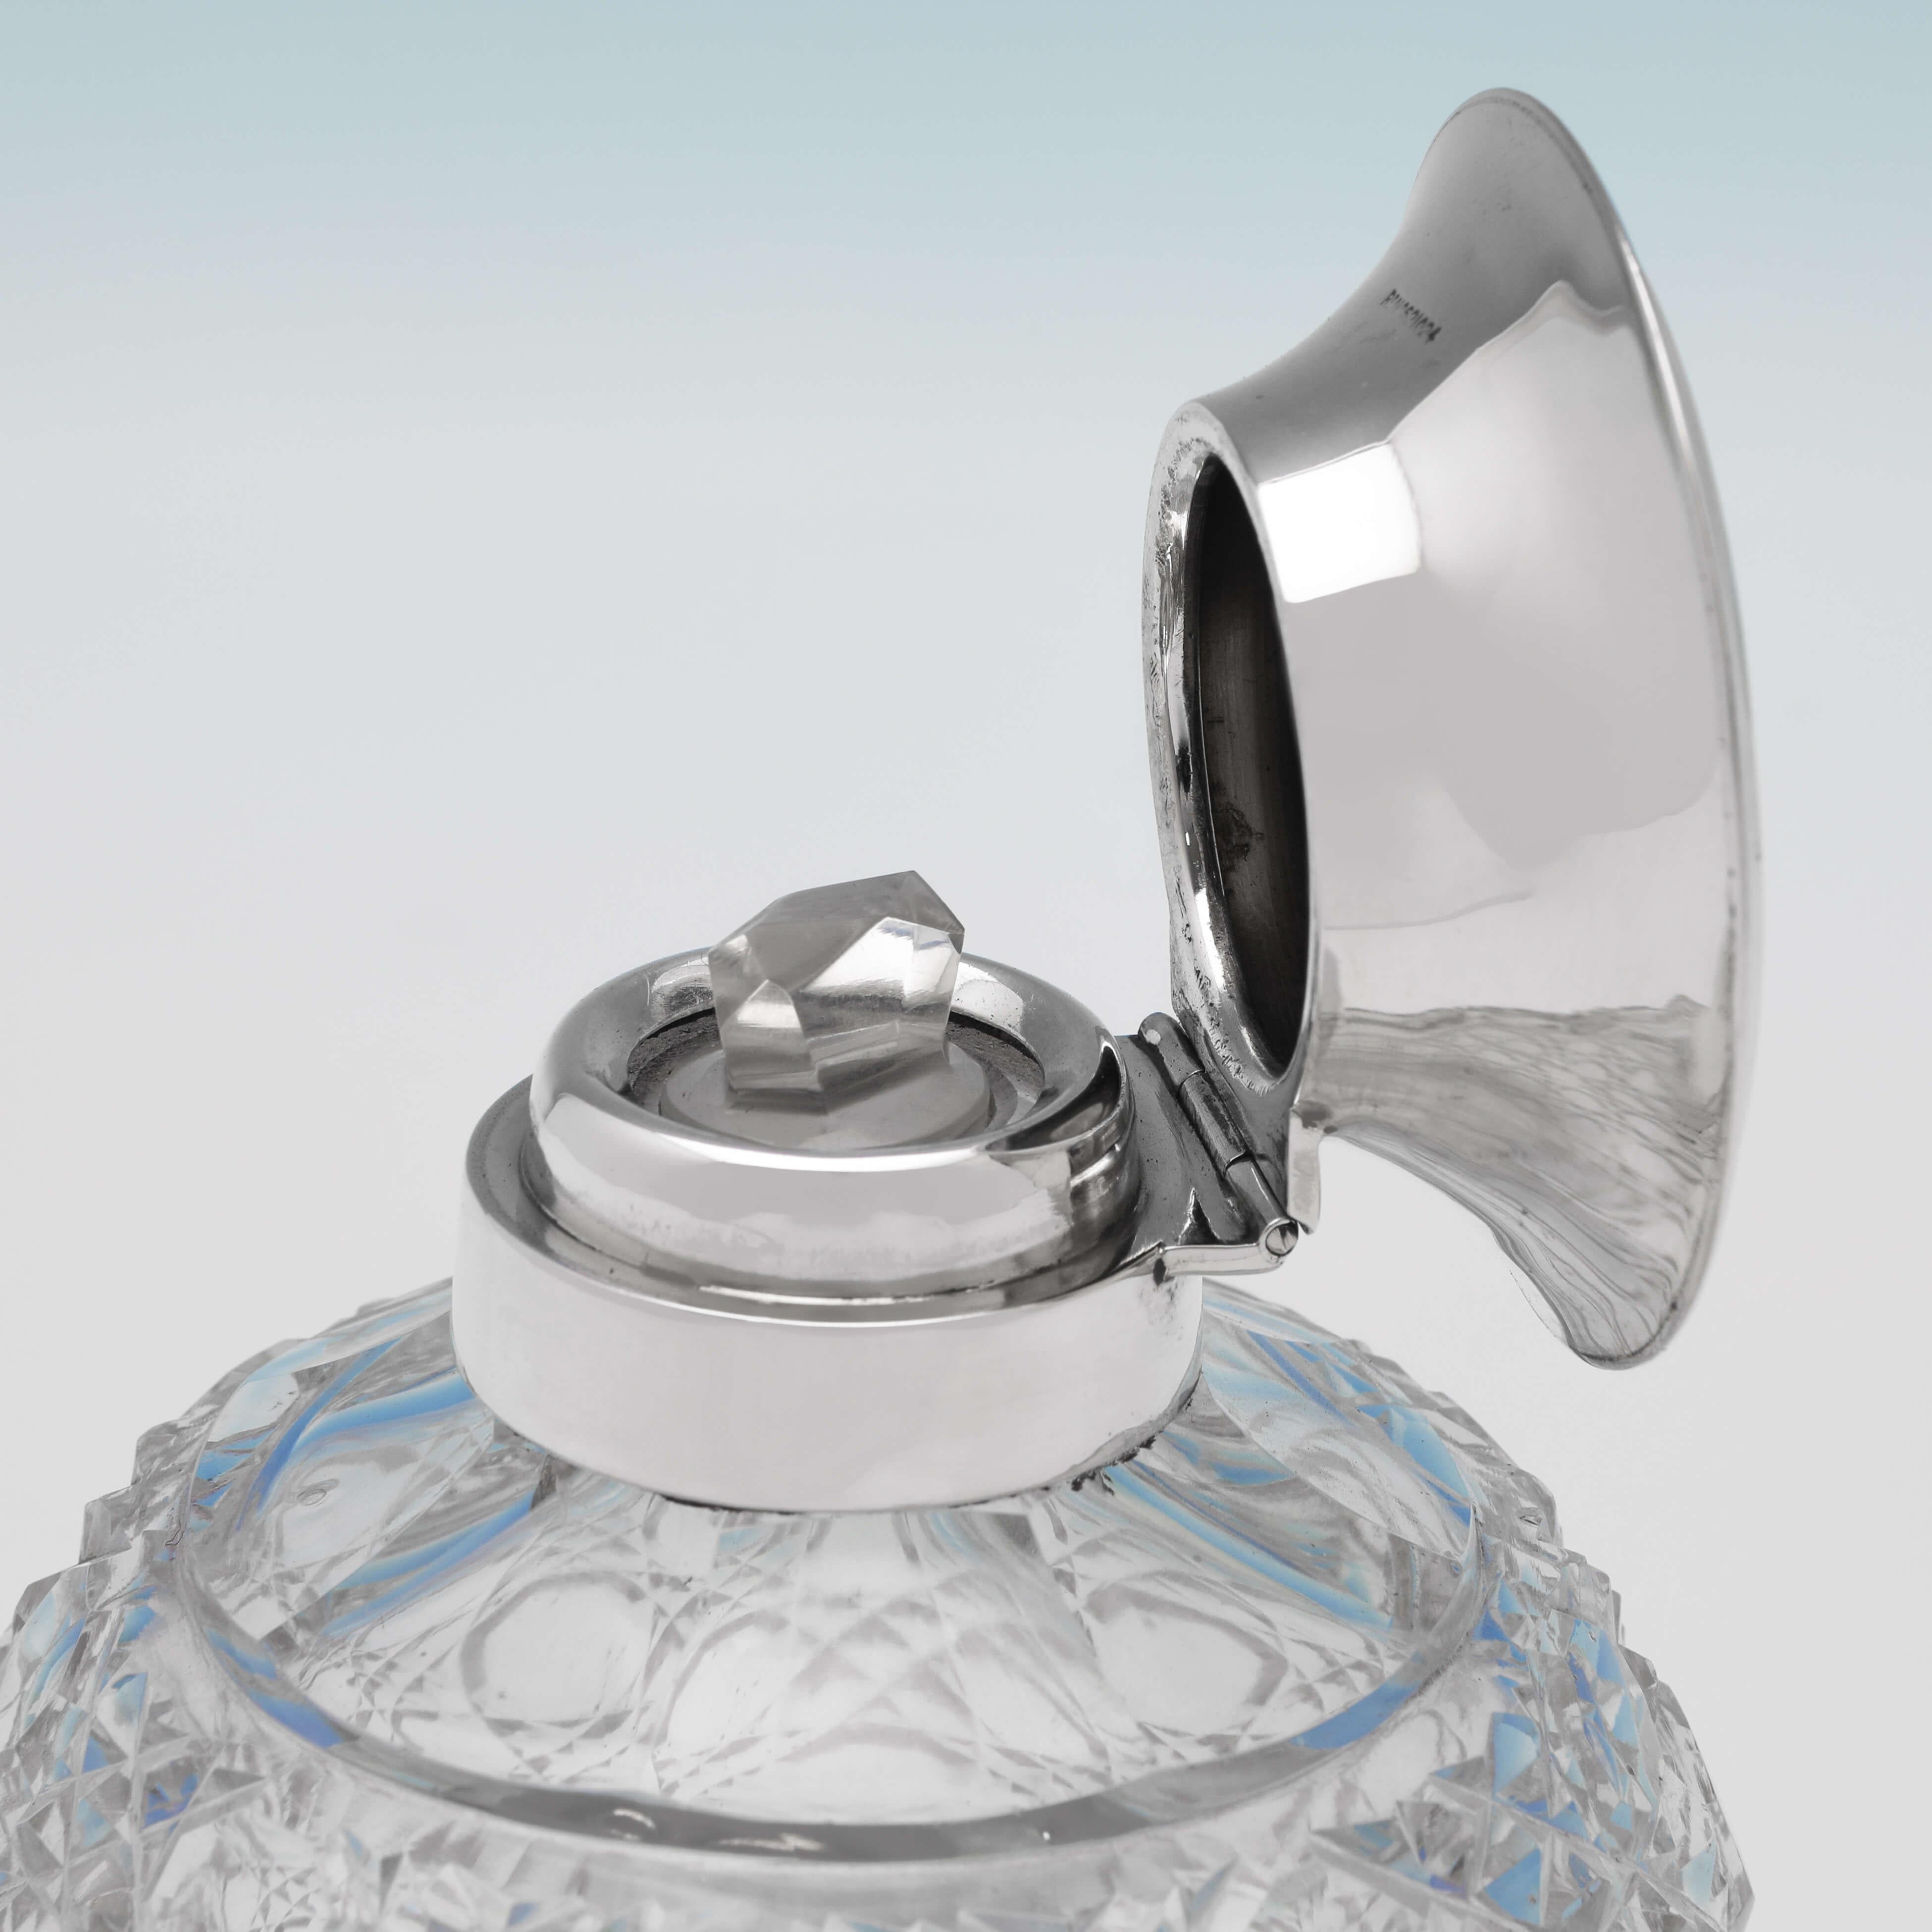 Hallmarked in Sheffield in 1913 by James Dixon & Sons, this George V, antique sterling silver scent bottle, features a hobnail cut glass body, and an engraved silver lid. The scent bottles measures 4.5